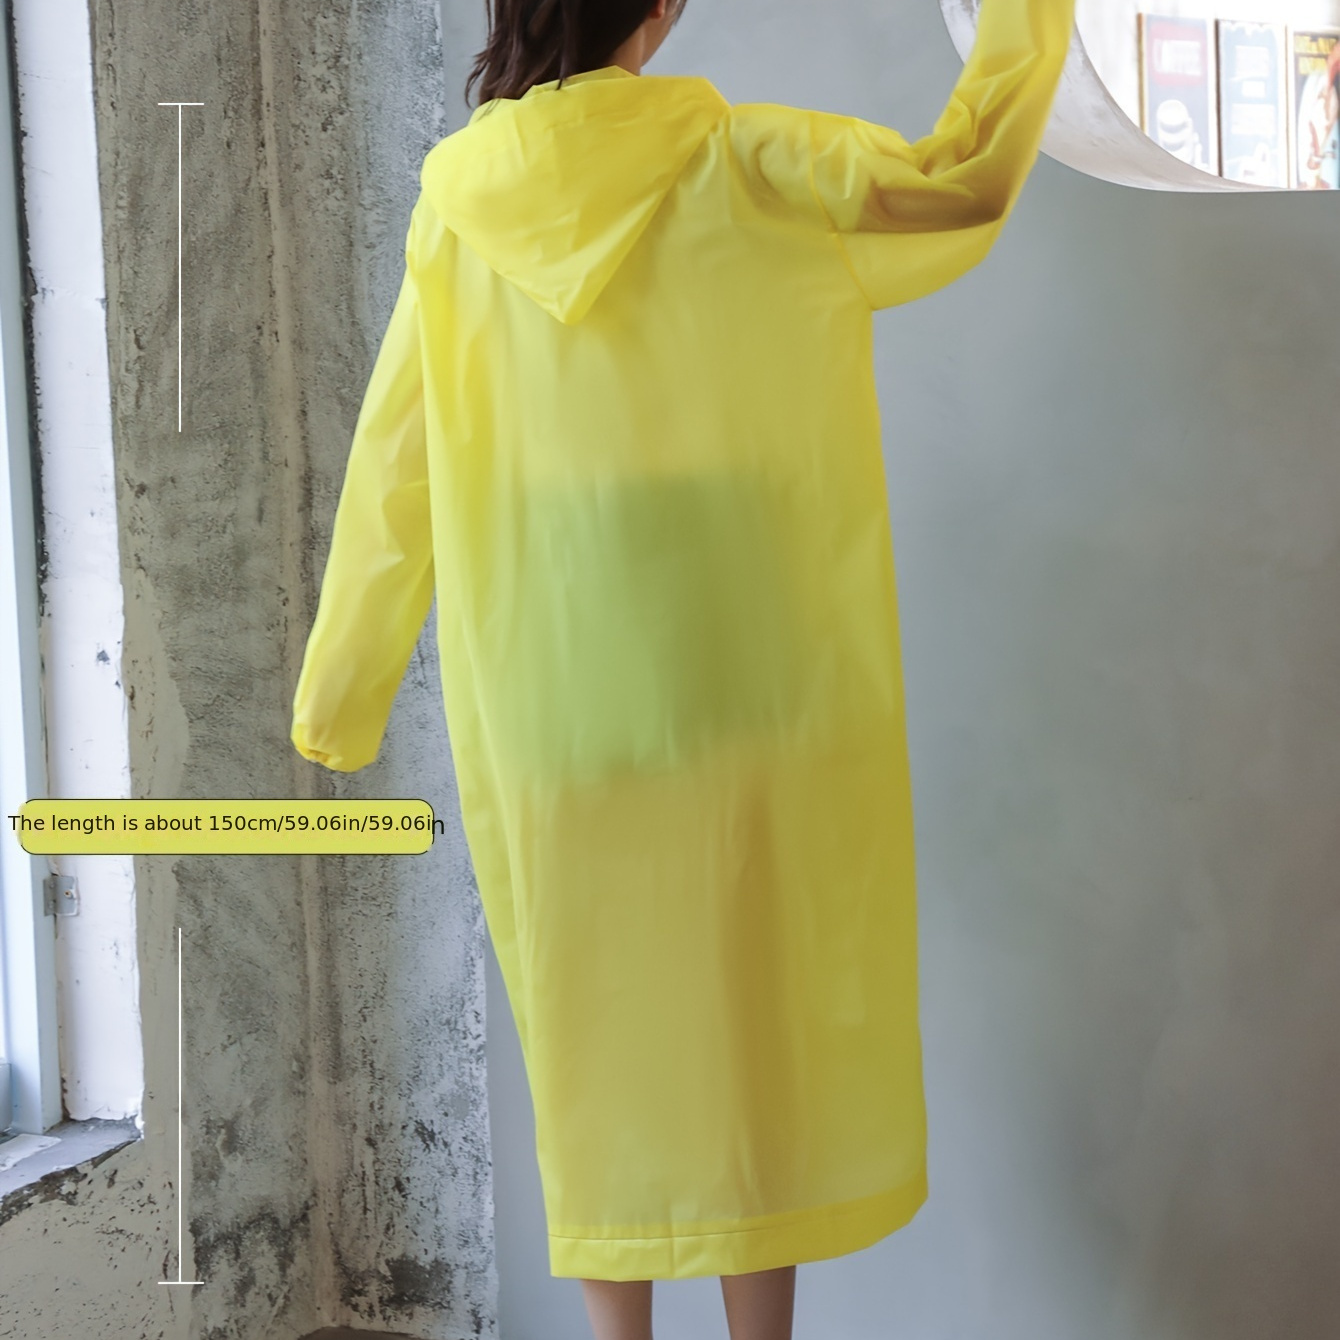 

Solid Color Yellow Raincoat, Eva Material Thickened Wear Resistant Durable, Suitable For Daily Rain Going Out, Trekking, Fishing, Mountaineering, Tourism And Riding